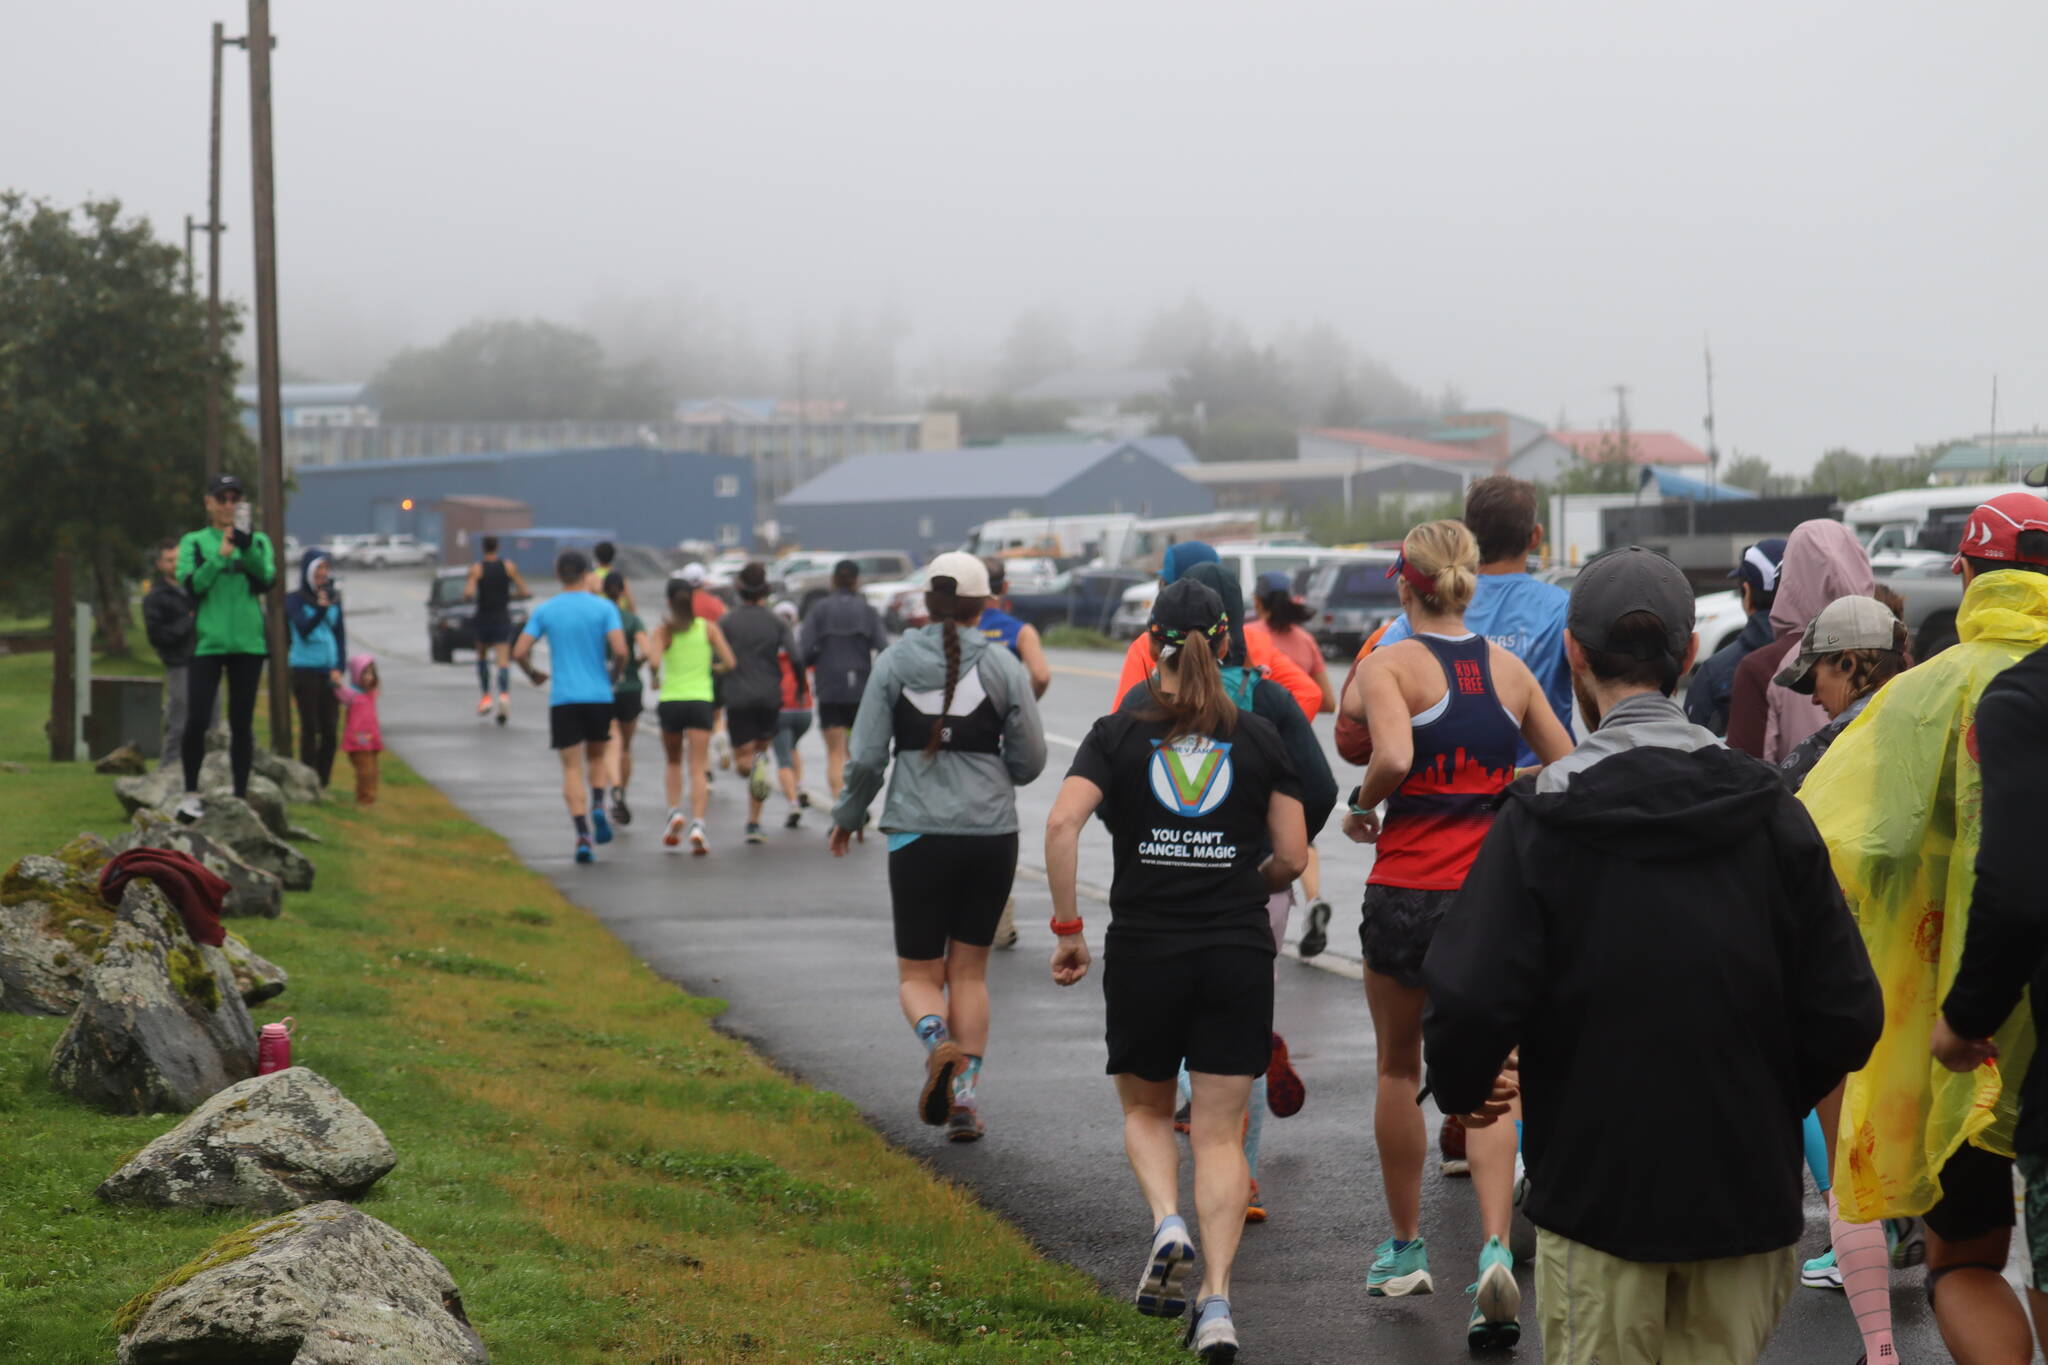 Runners for the 2022 Juneau Marathon started the race at Savikko Park on Douglas Island and ran an out-and-back course in light rain on Saturday morning. (Jonson Kuhn / Juneau Empire)